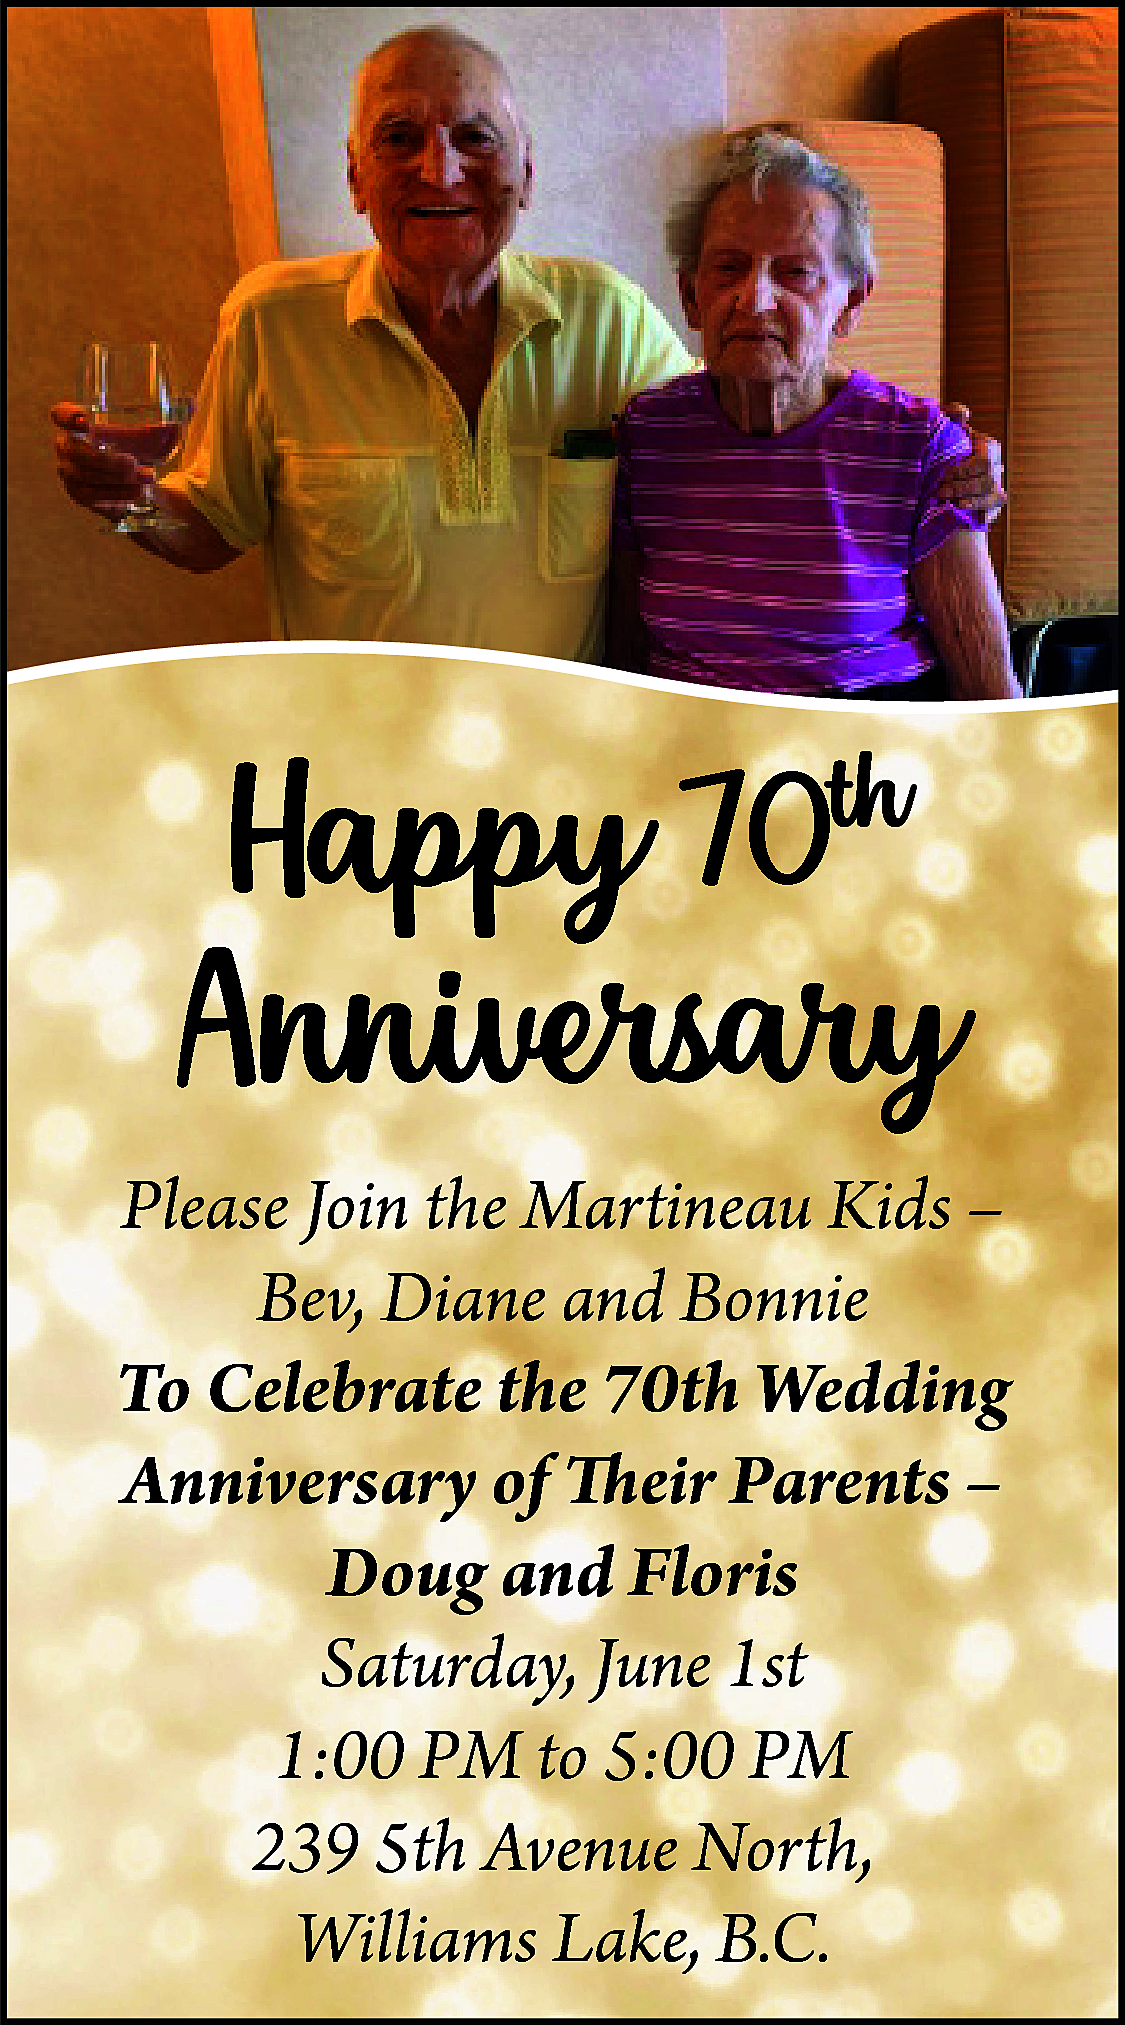 Happy 70th <br>Anniversary <br>Please Join  Happy 70th  Anniversary  Please Join the Martineau Kids –  Bev, Diane and Bonnie  To Celebrate the 70th Wedding  Anniversary of Their Parents –  Doug and Floris  Saturday, June 1st  1:00 PM to 5:00 PM  239 5th Avenue North,  Williams Lake, B.C.    